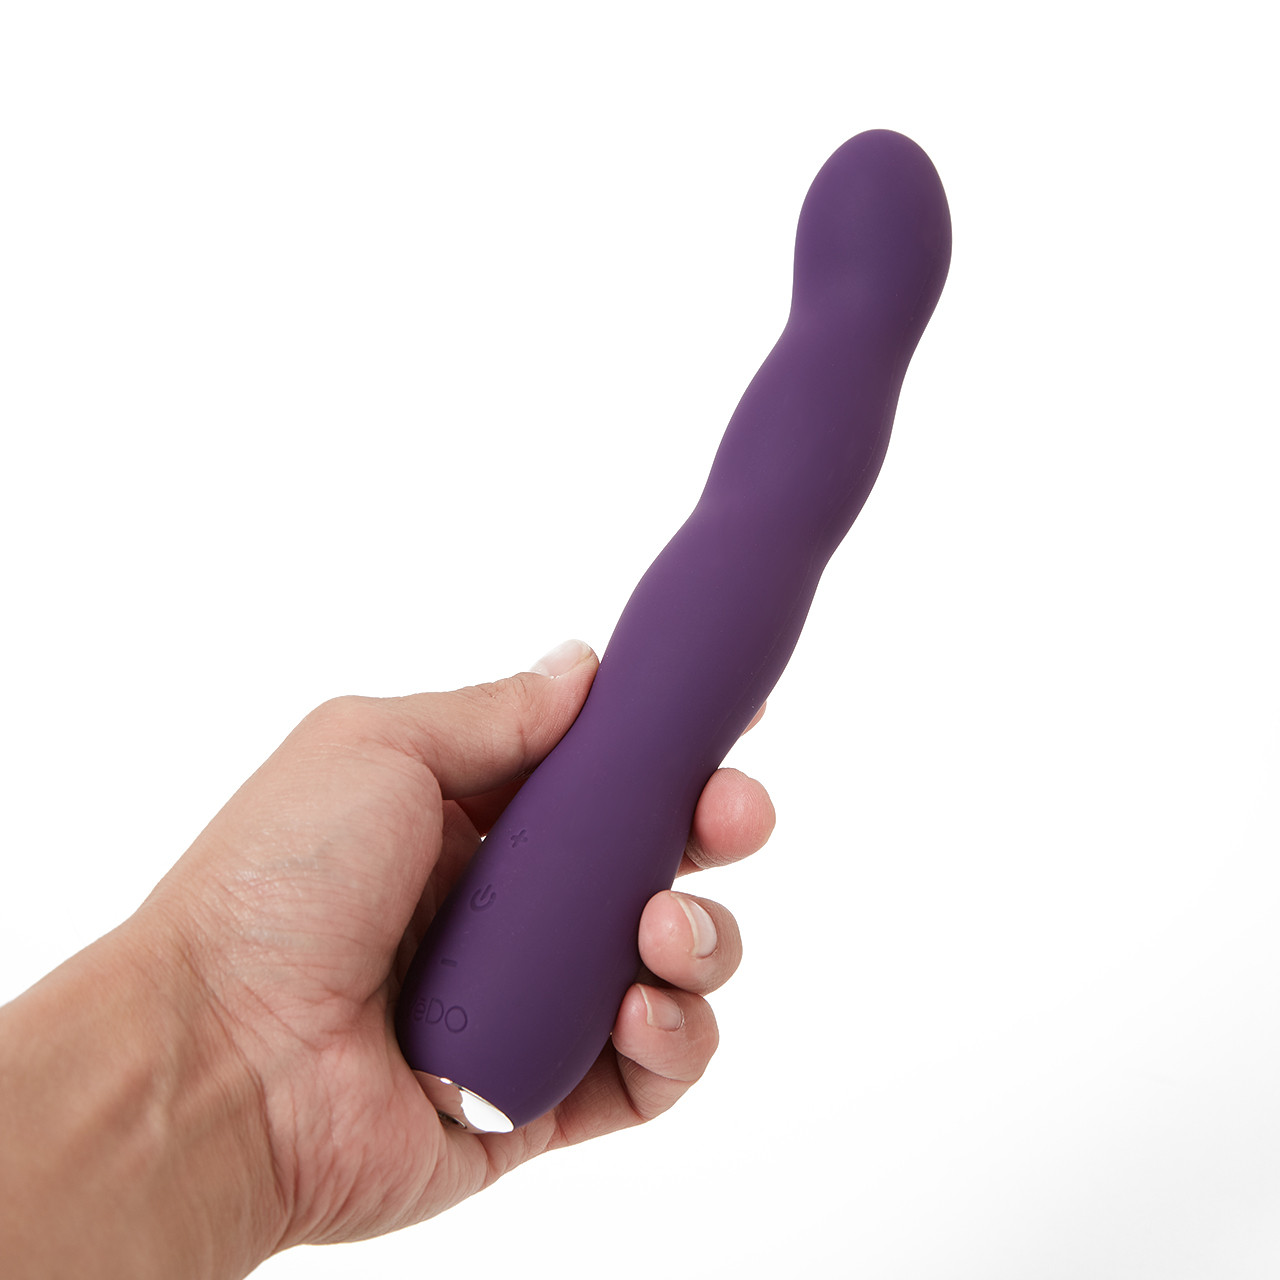 VeDo Quiver Plus Vibe', a slender deep purple vibrator held in a hand